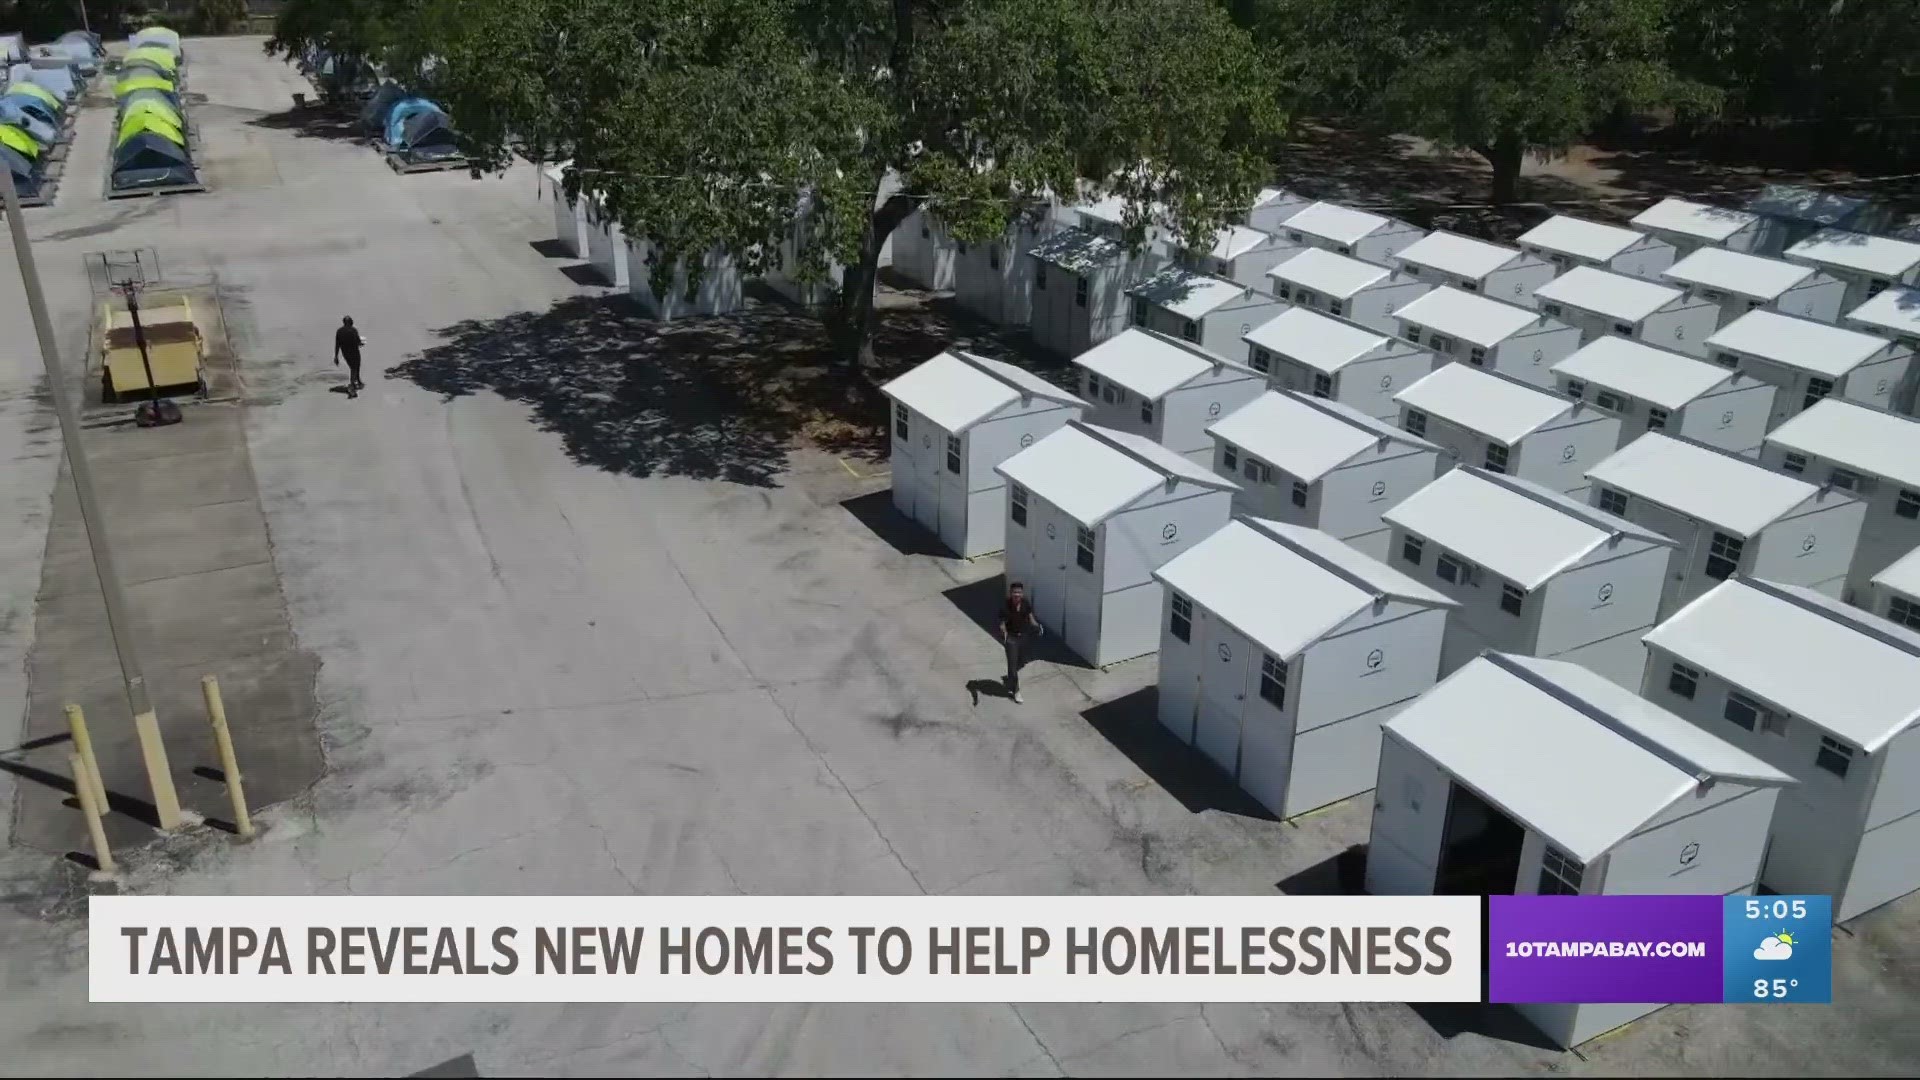 "Hope Cottages" in Tampa aims to help people experiencing homelessness. They're expected to be ready in the fall.